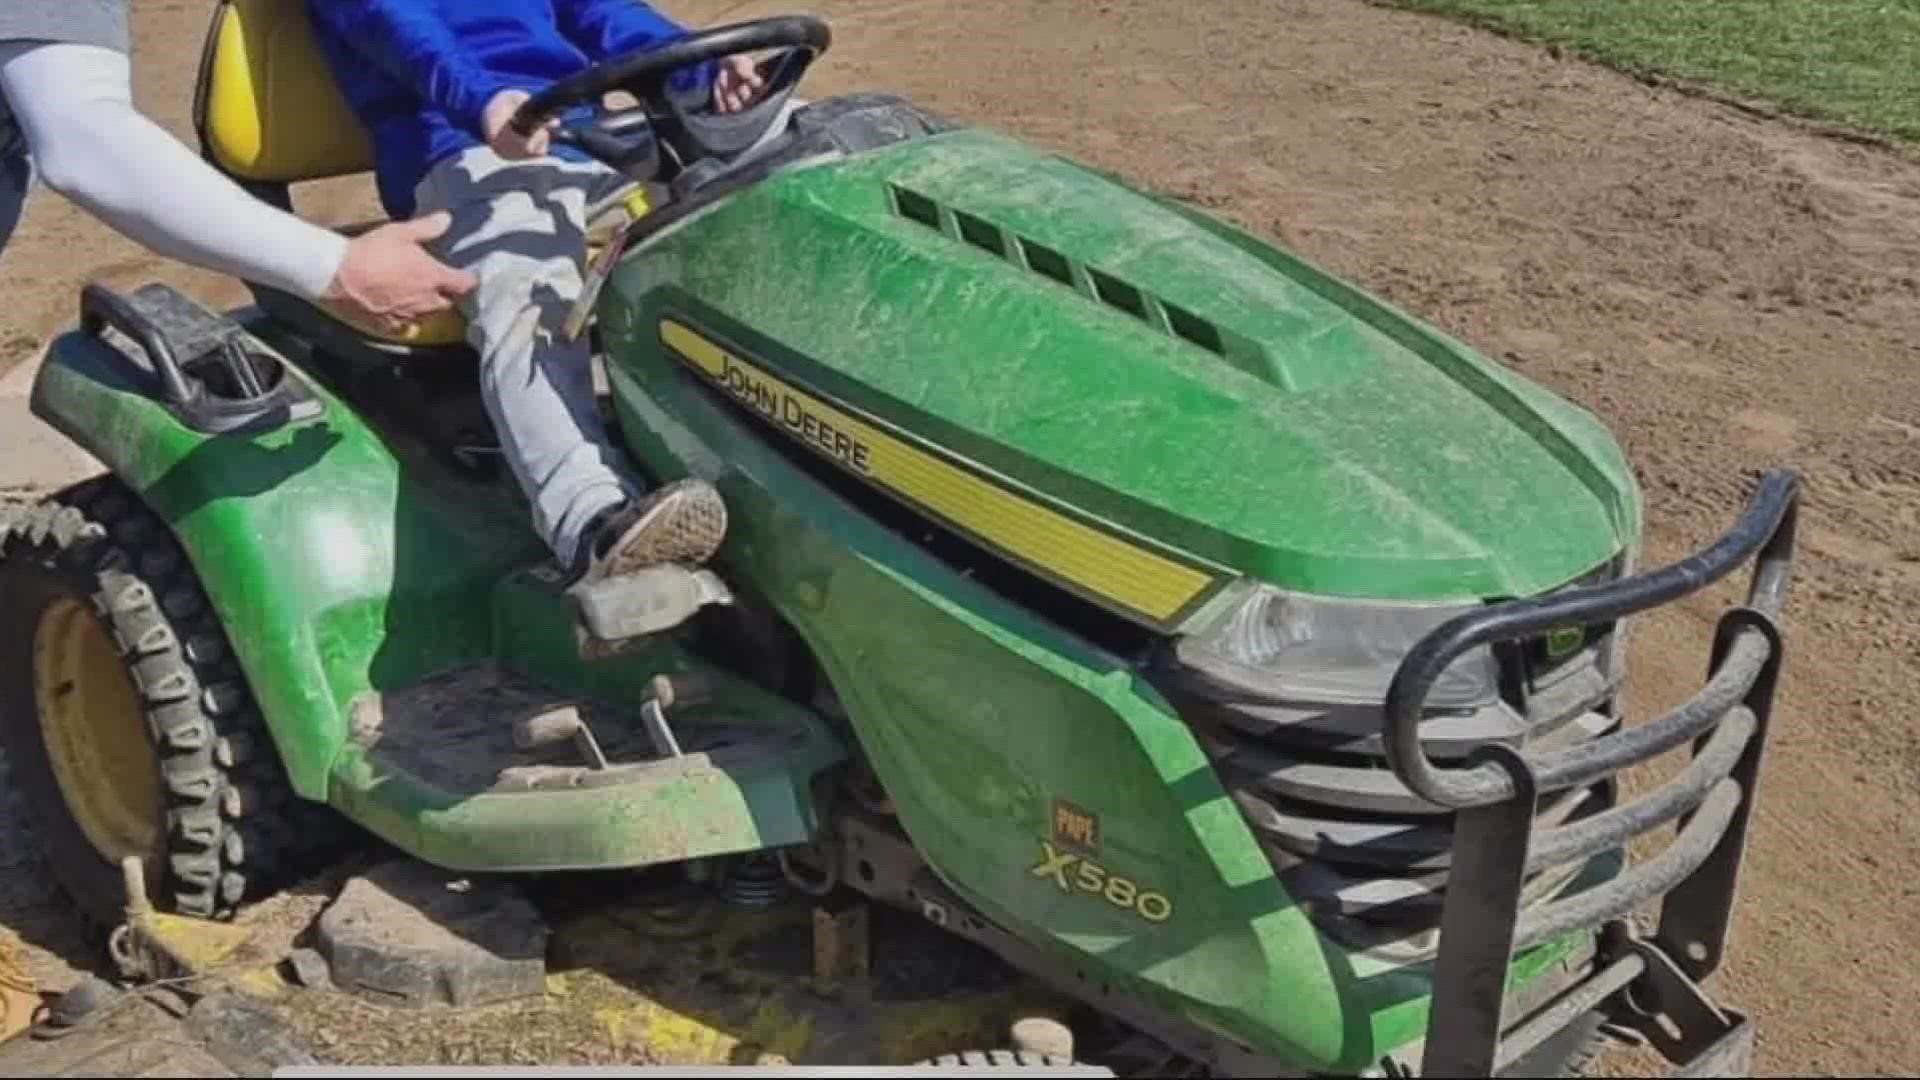 The riding lawnmower will cost $8,000 to replace. The family that takes care of the ballfields hopes the equipment is returned or the culprits caught.